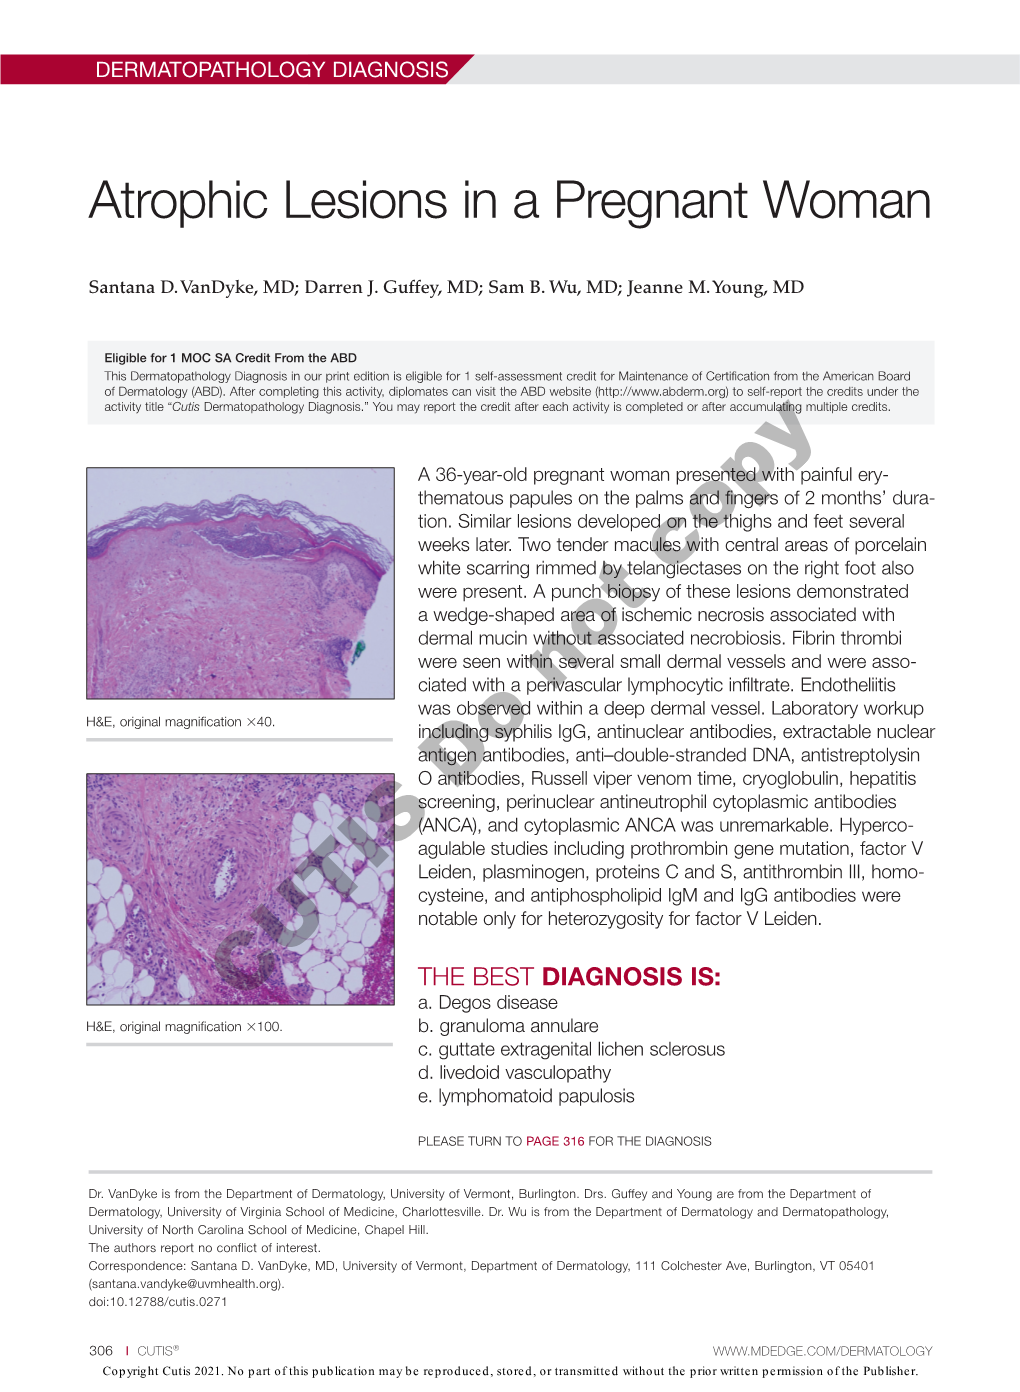 Atrophic Lesions in a Pregnant Woman